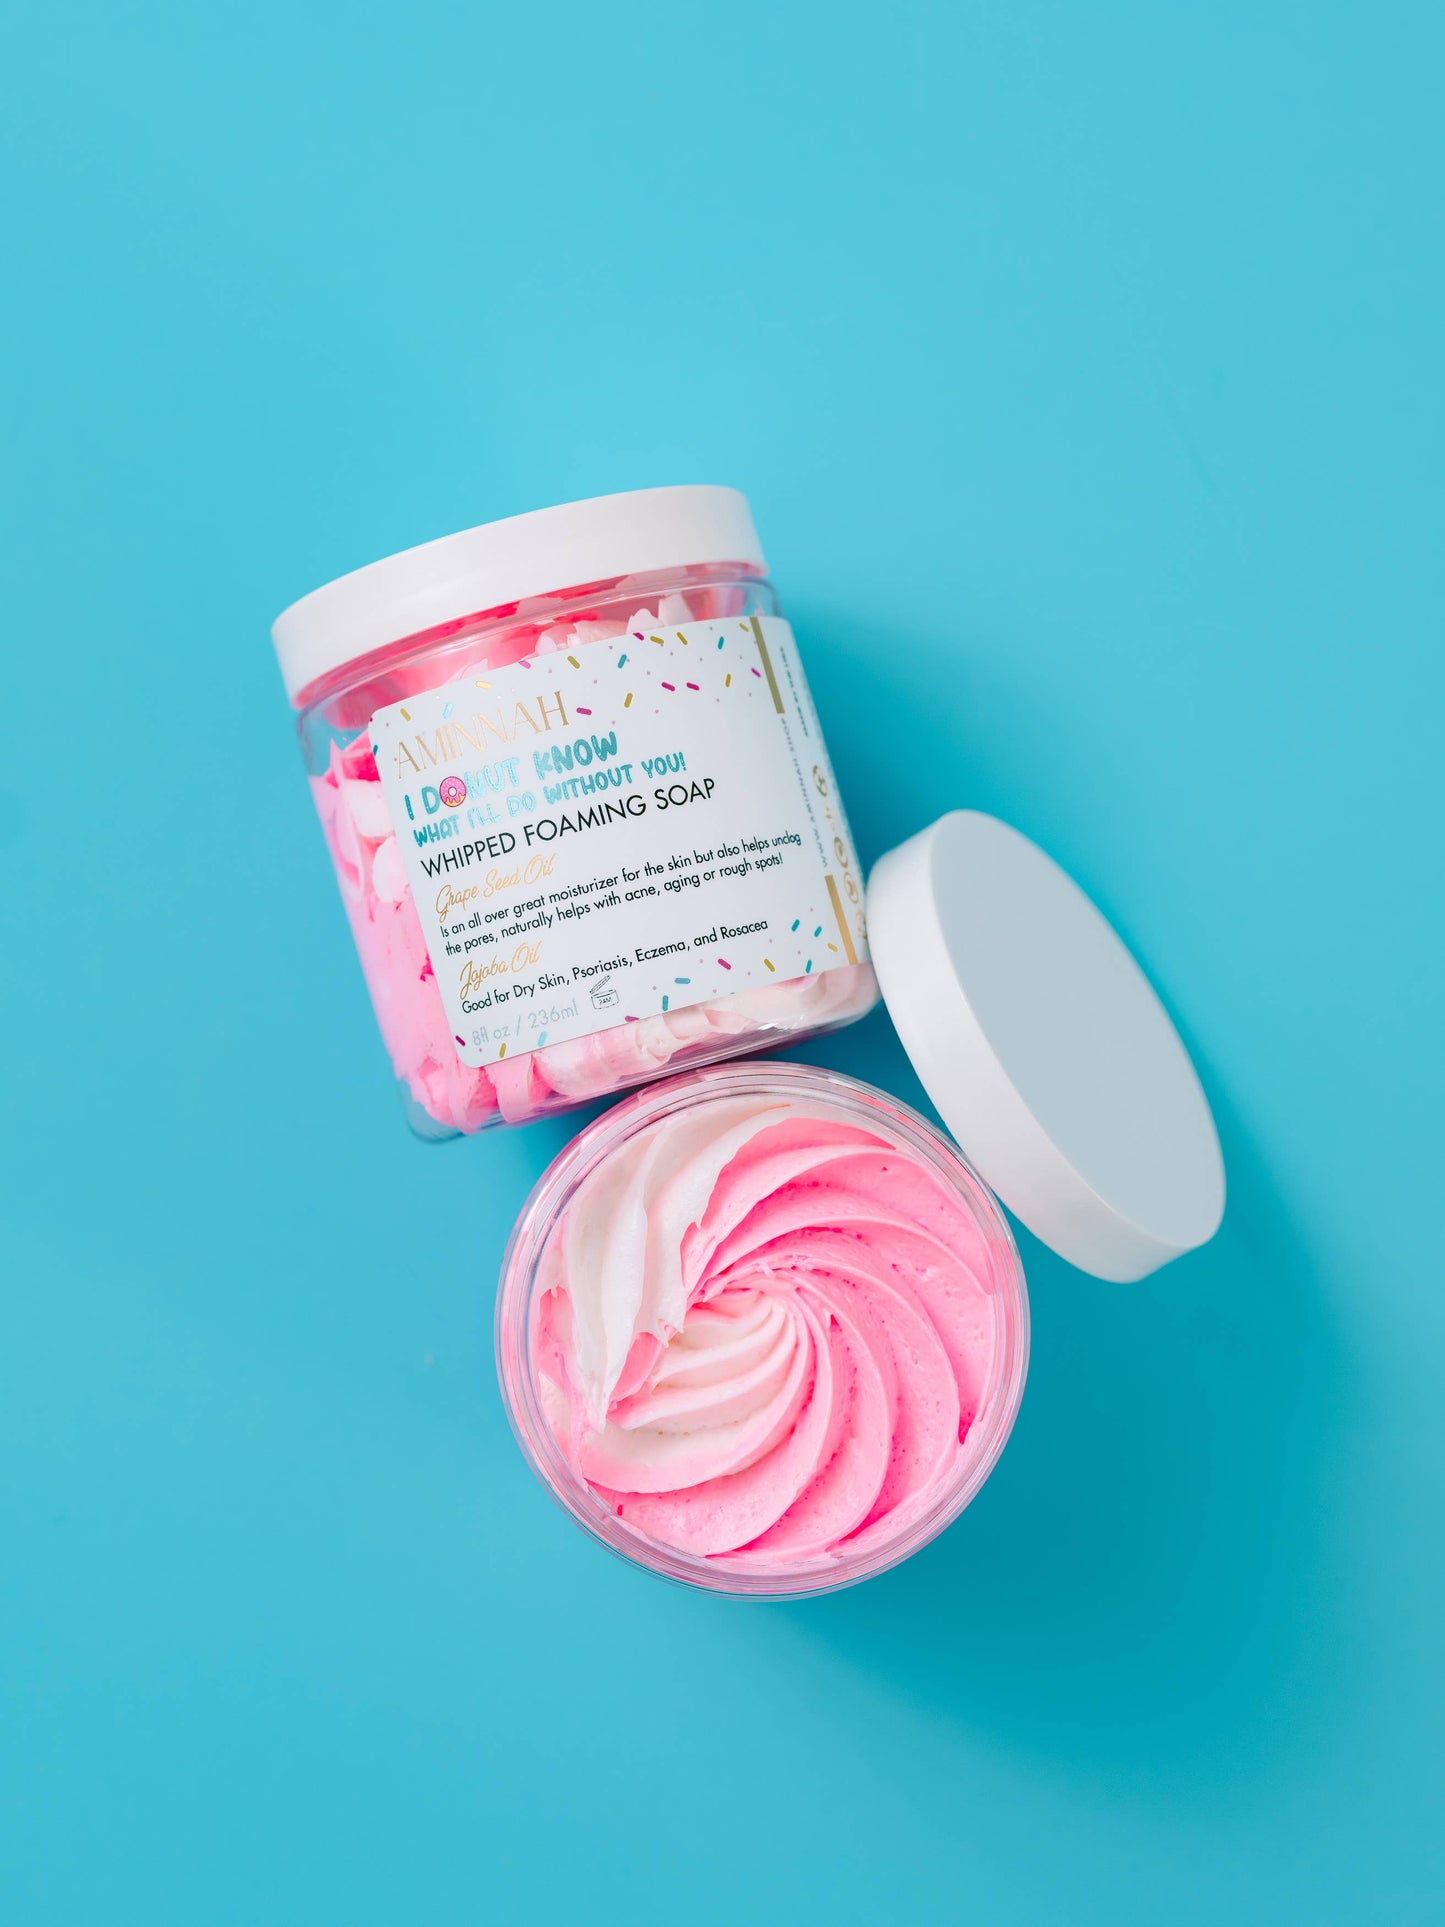 "I Donut Know What I'll Do Without You" Body Butter